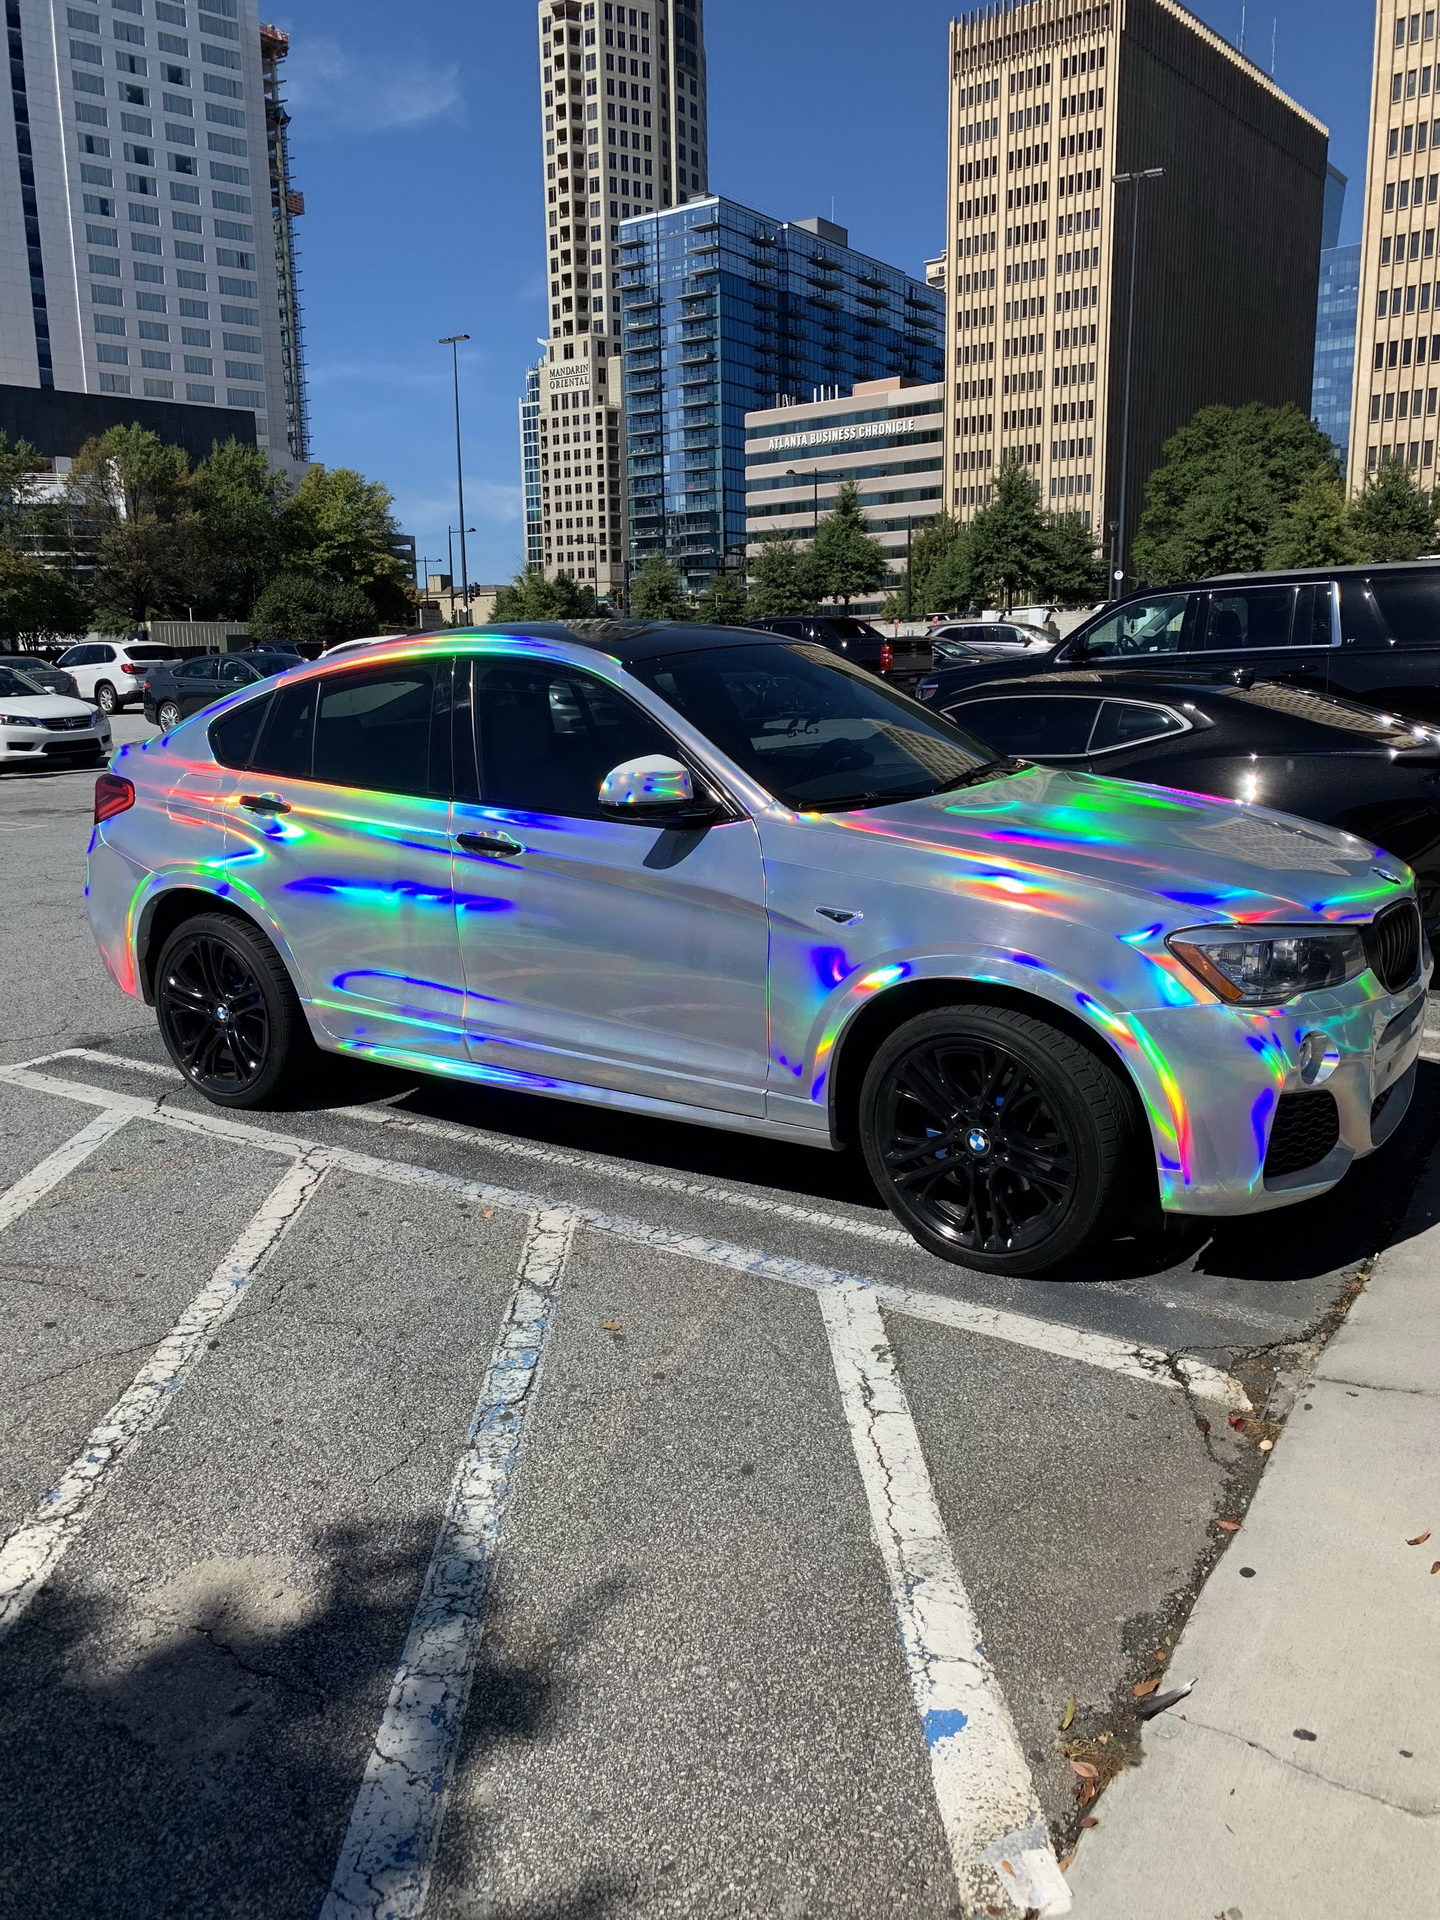 BMW With Chrome Hologram Wrap Is A Head-Turner, Unfortunately | Carscoops